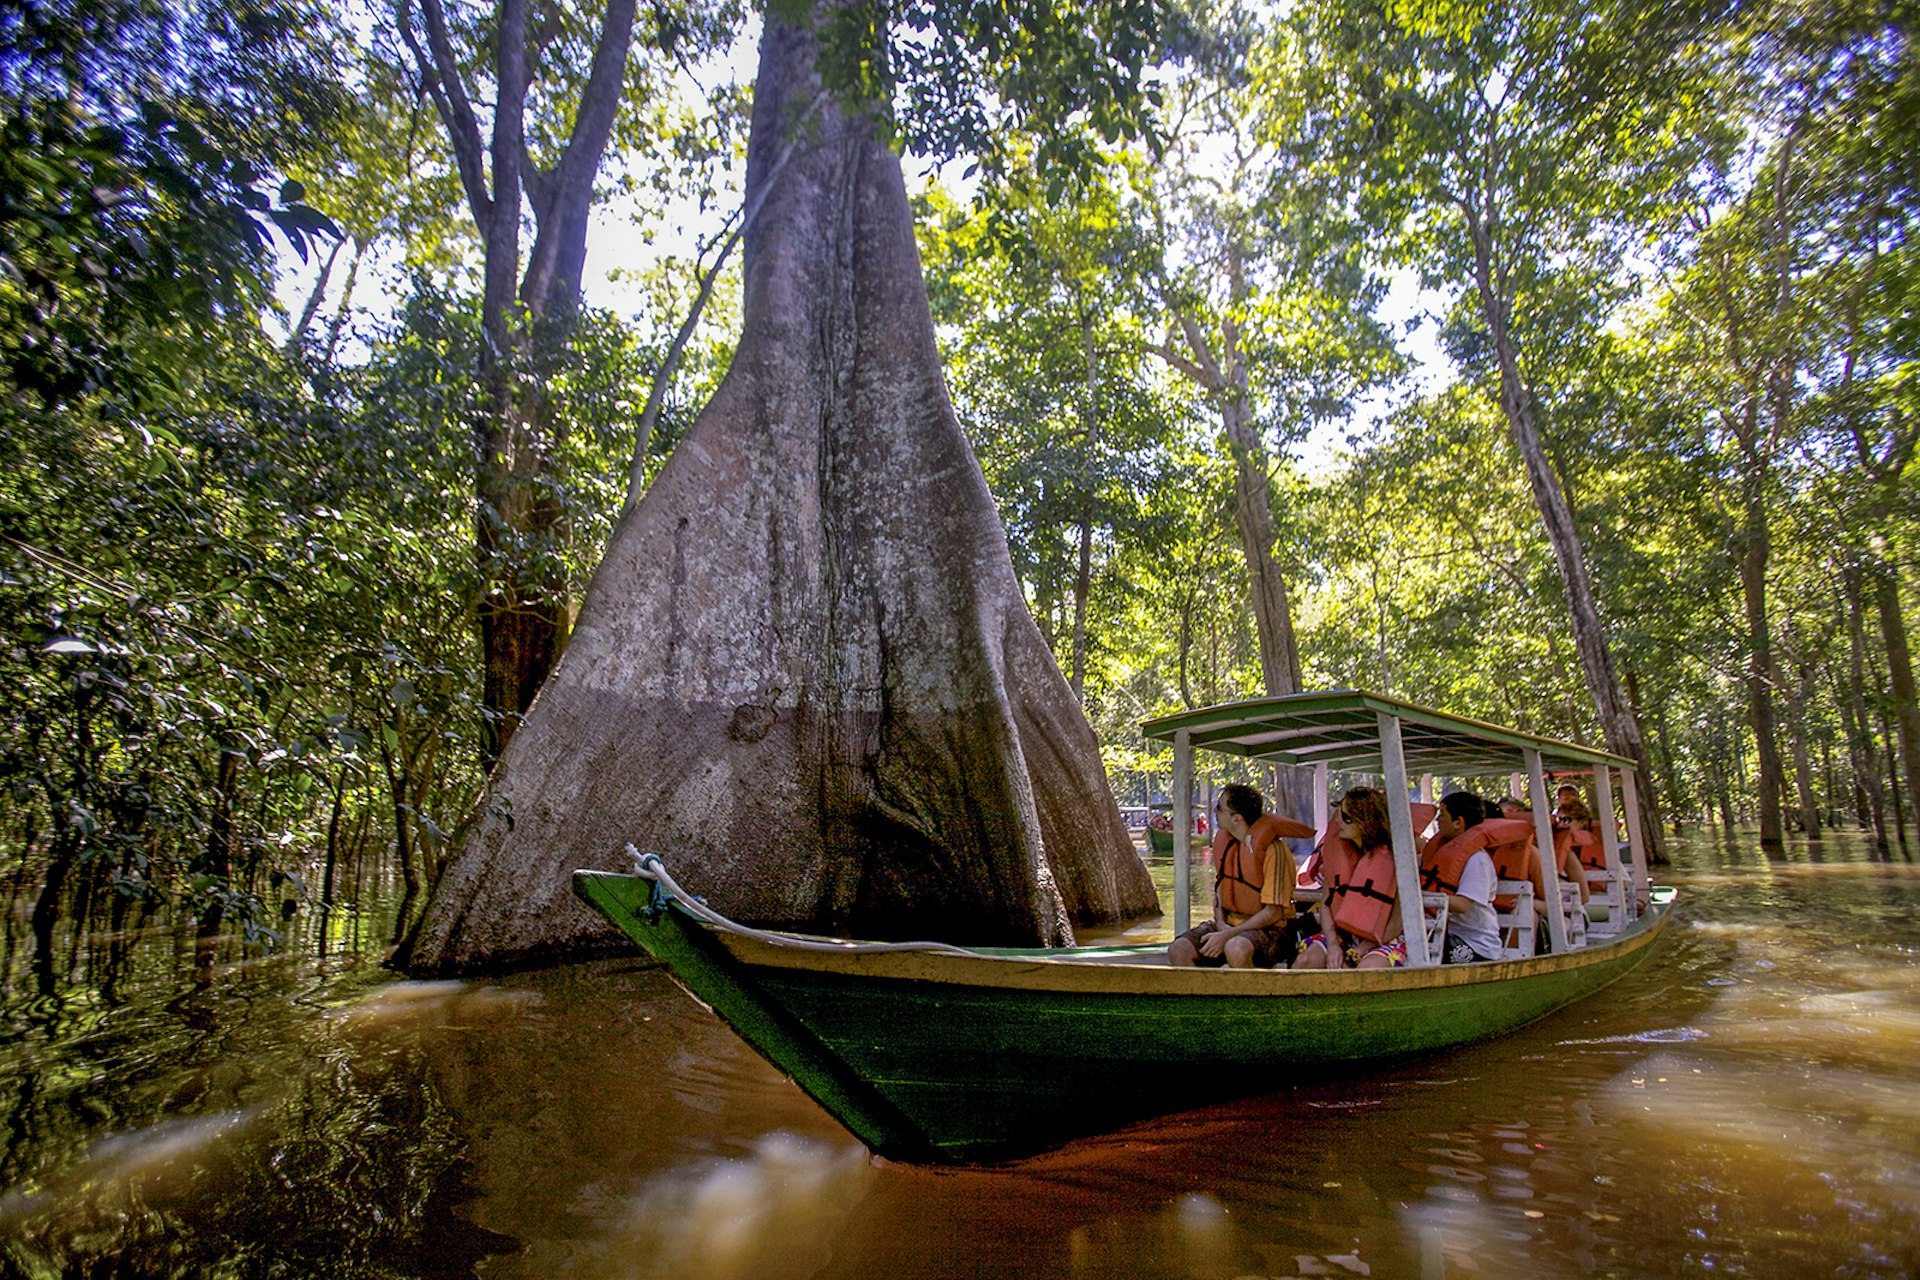 A boat passes under the canopy of a large tree with a buttressed root